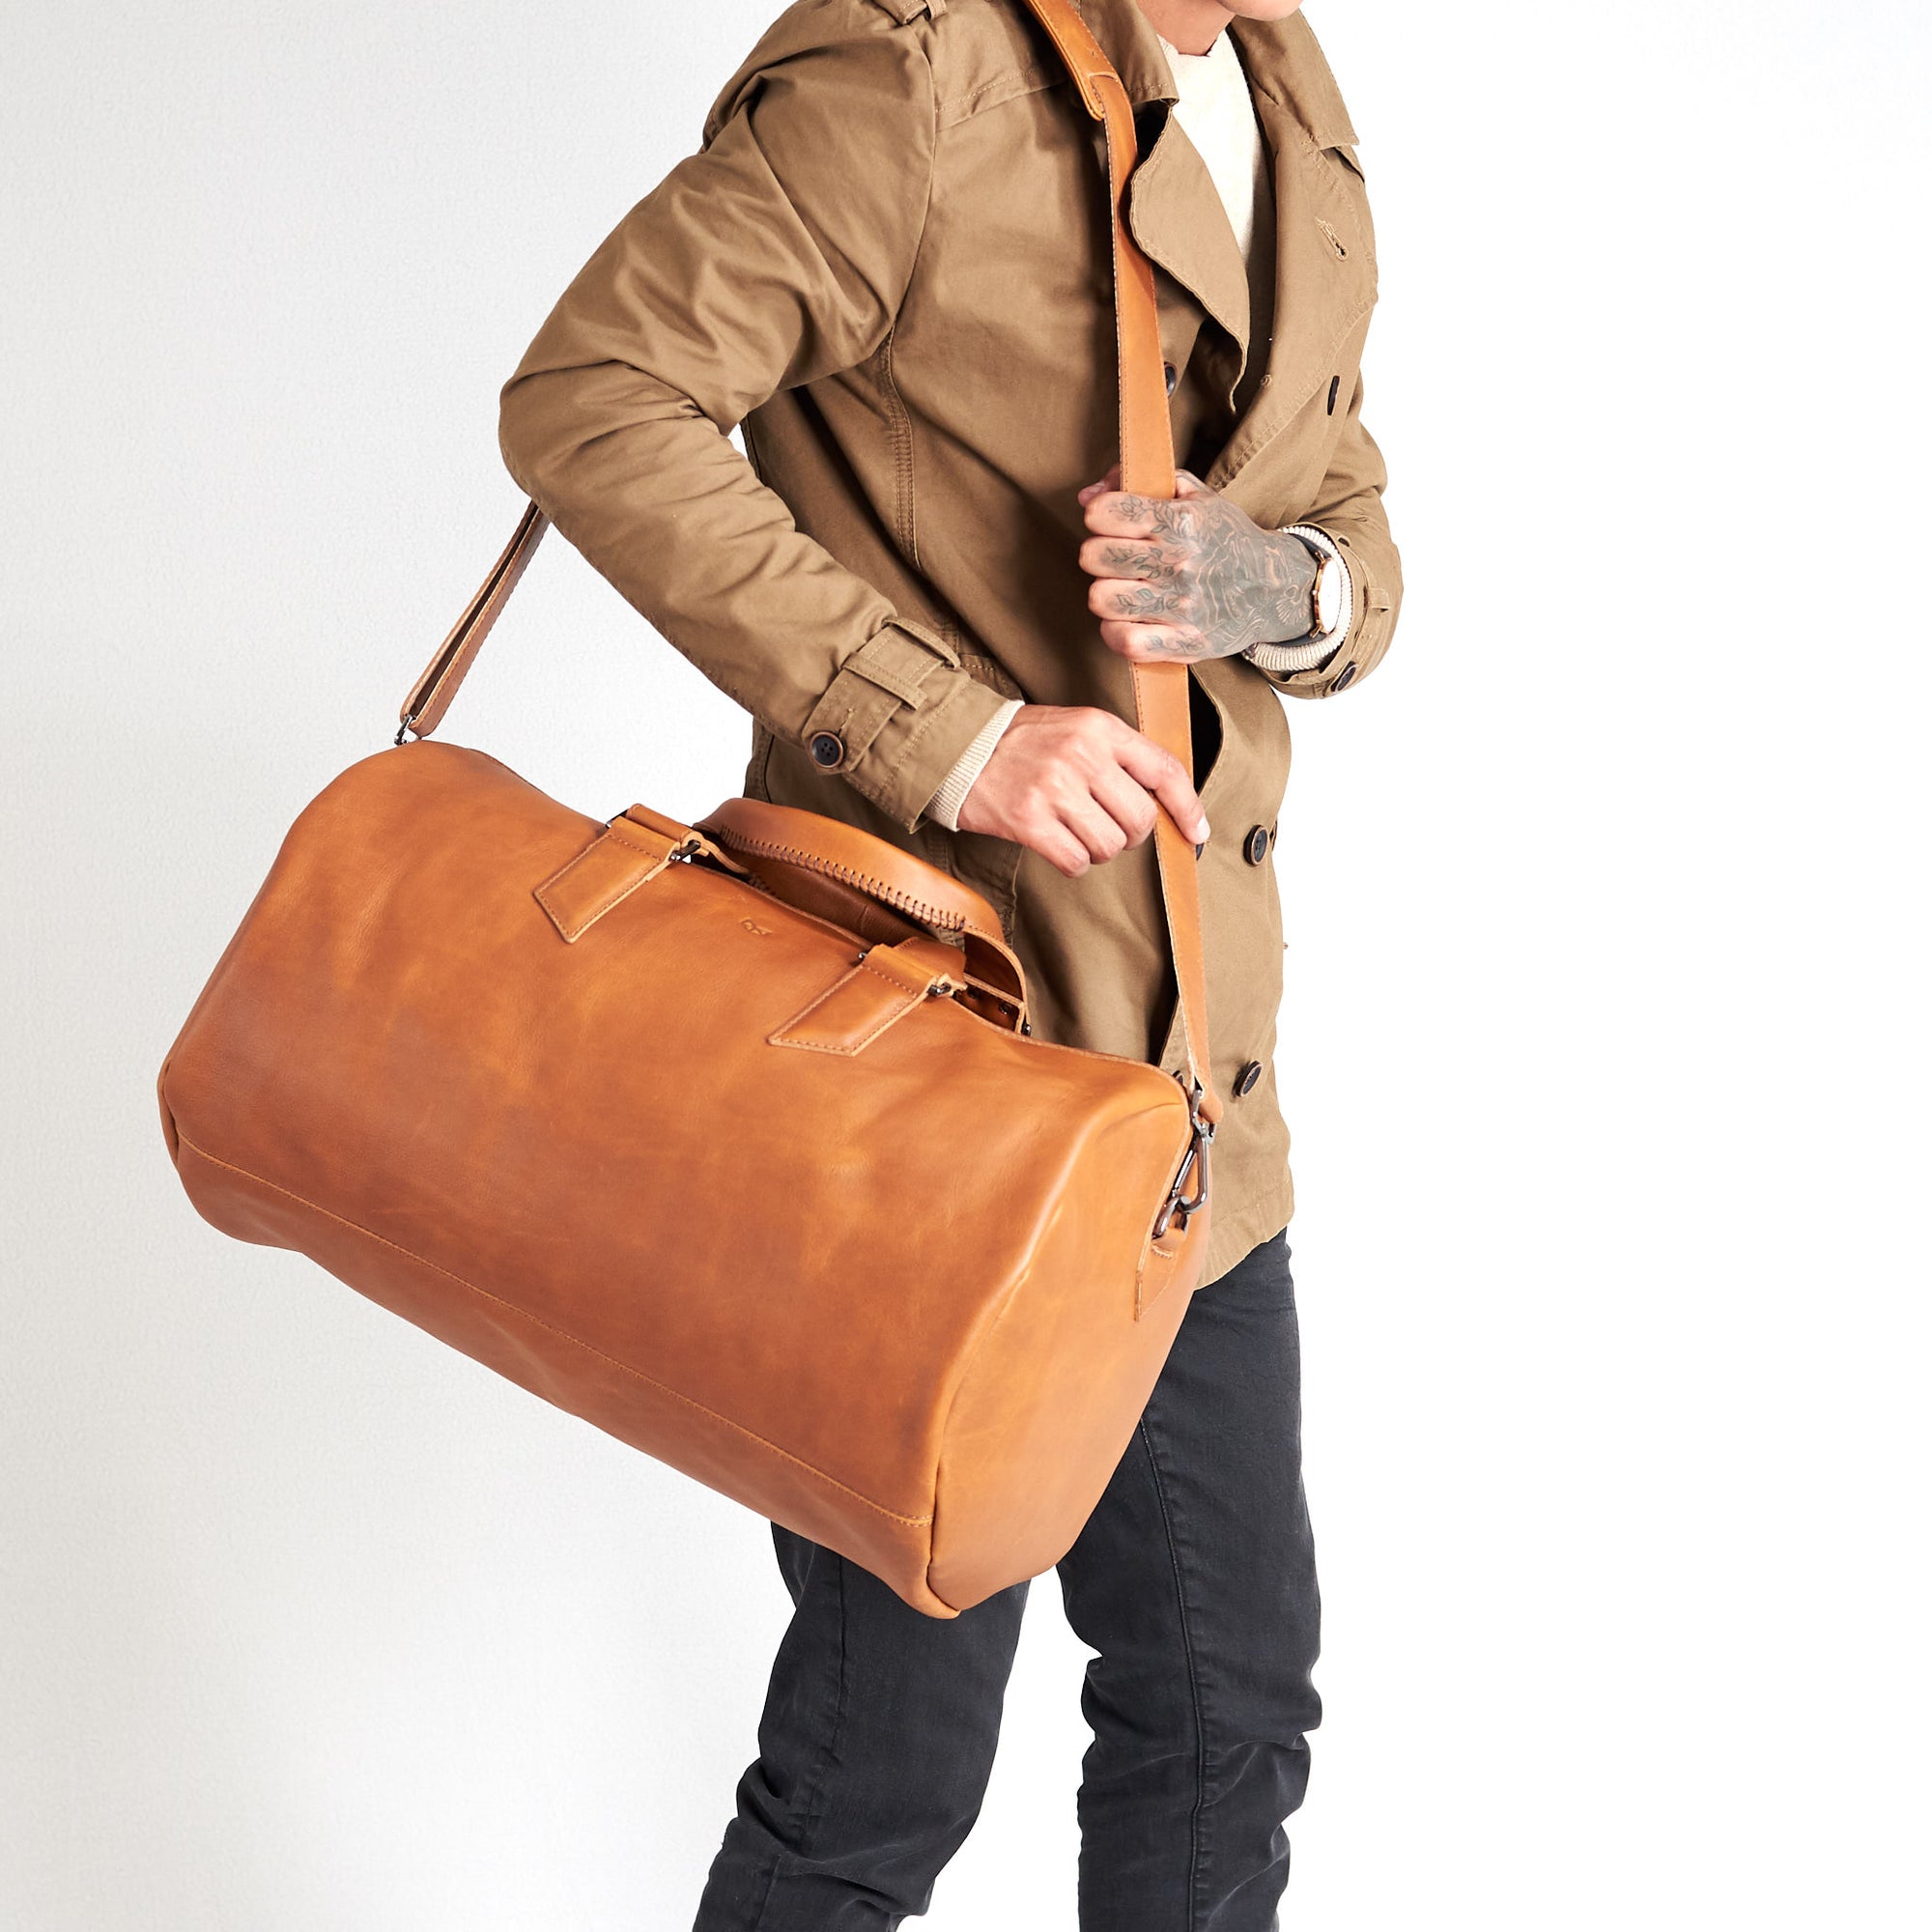 Substantial duffle bag tan by Capra Leather. Strap style carry bag.